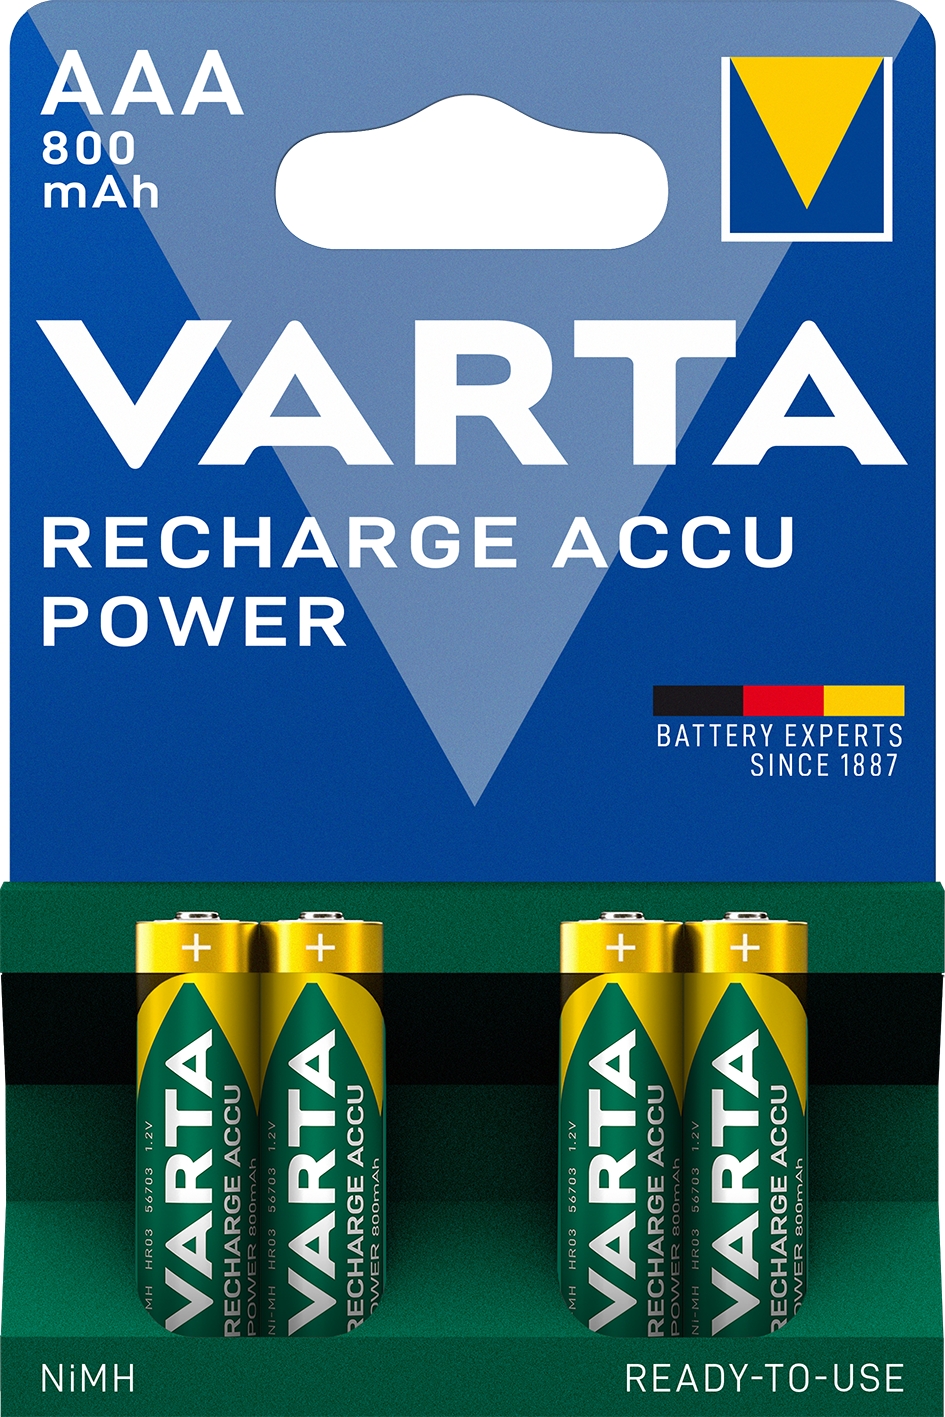  Pile rechargeable LR03 AAA (x4) 